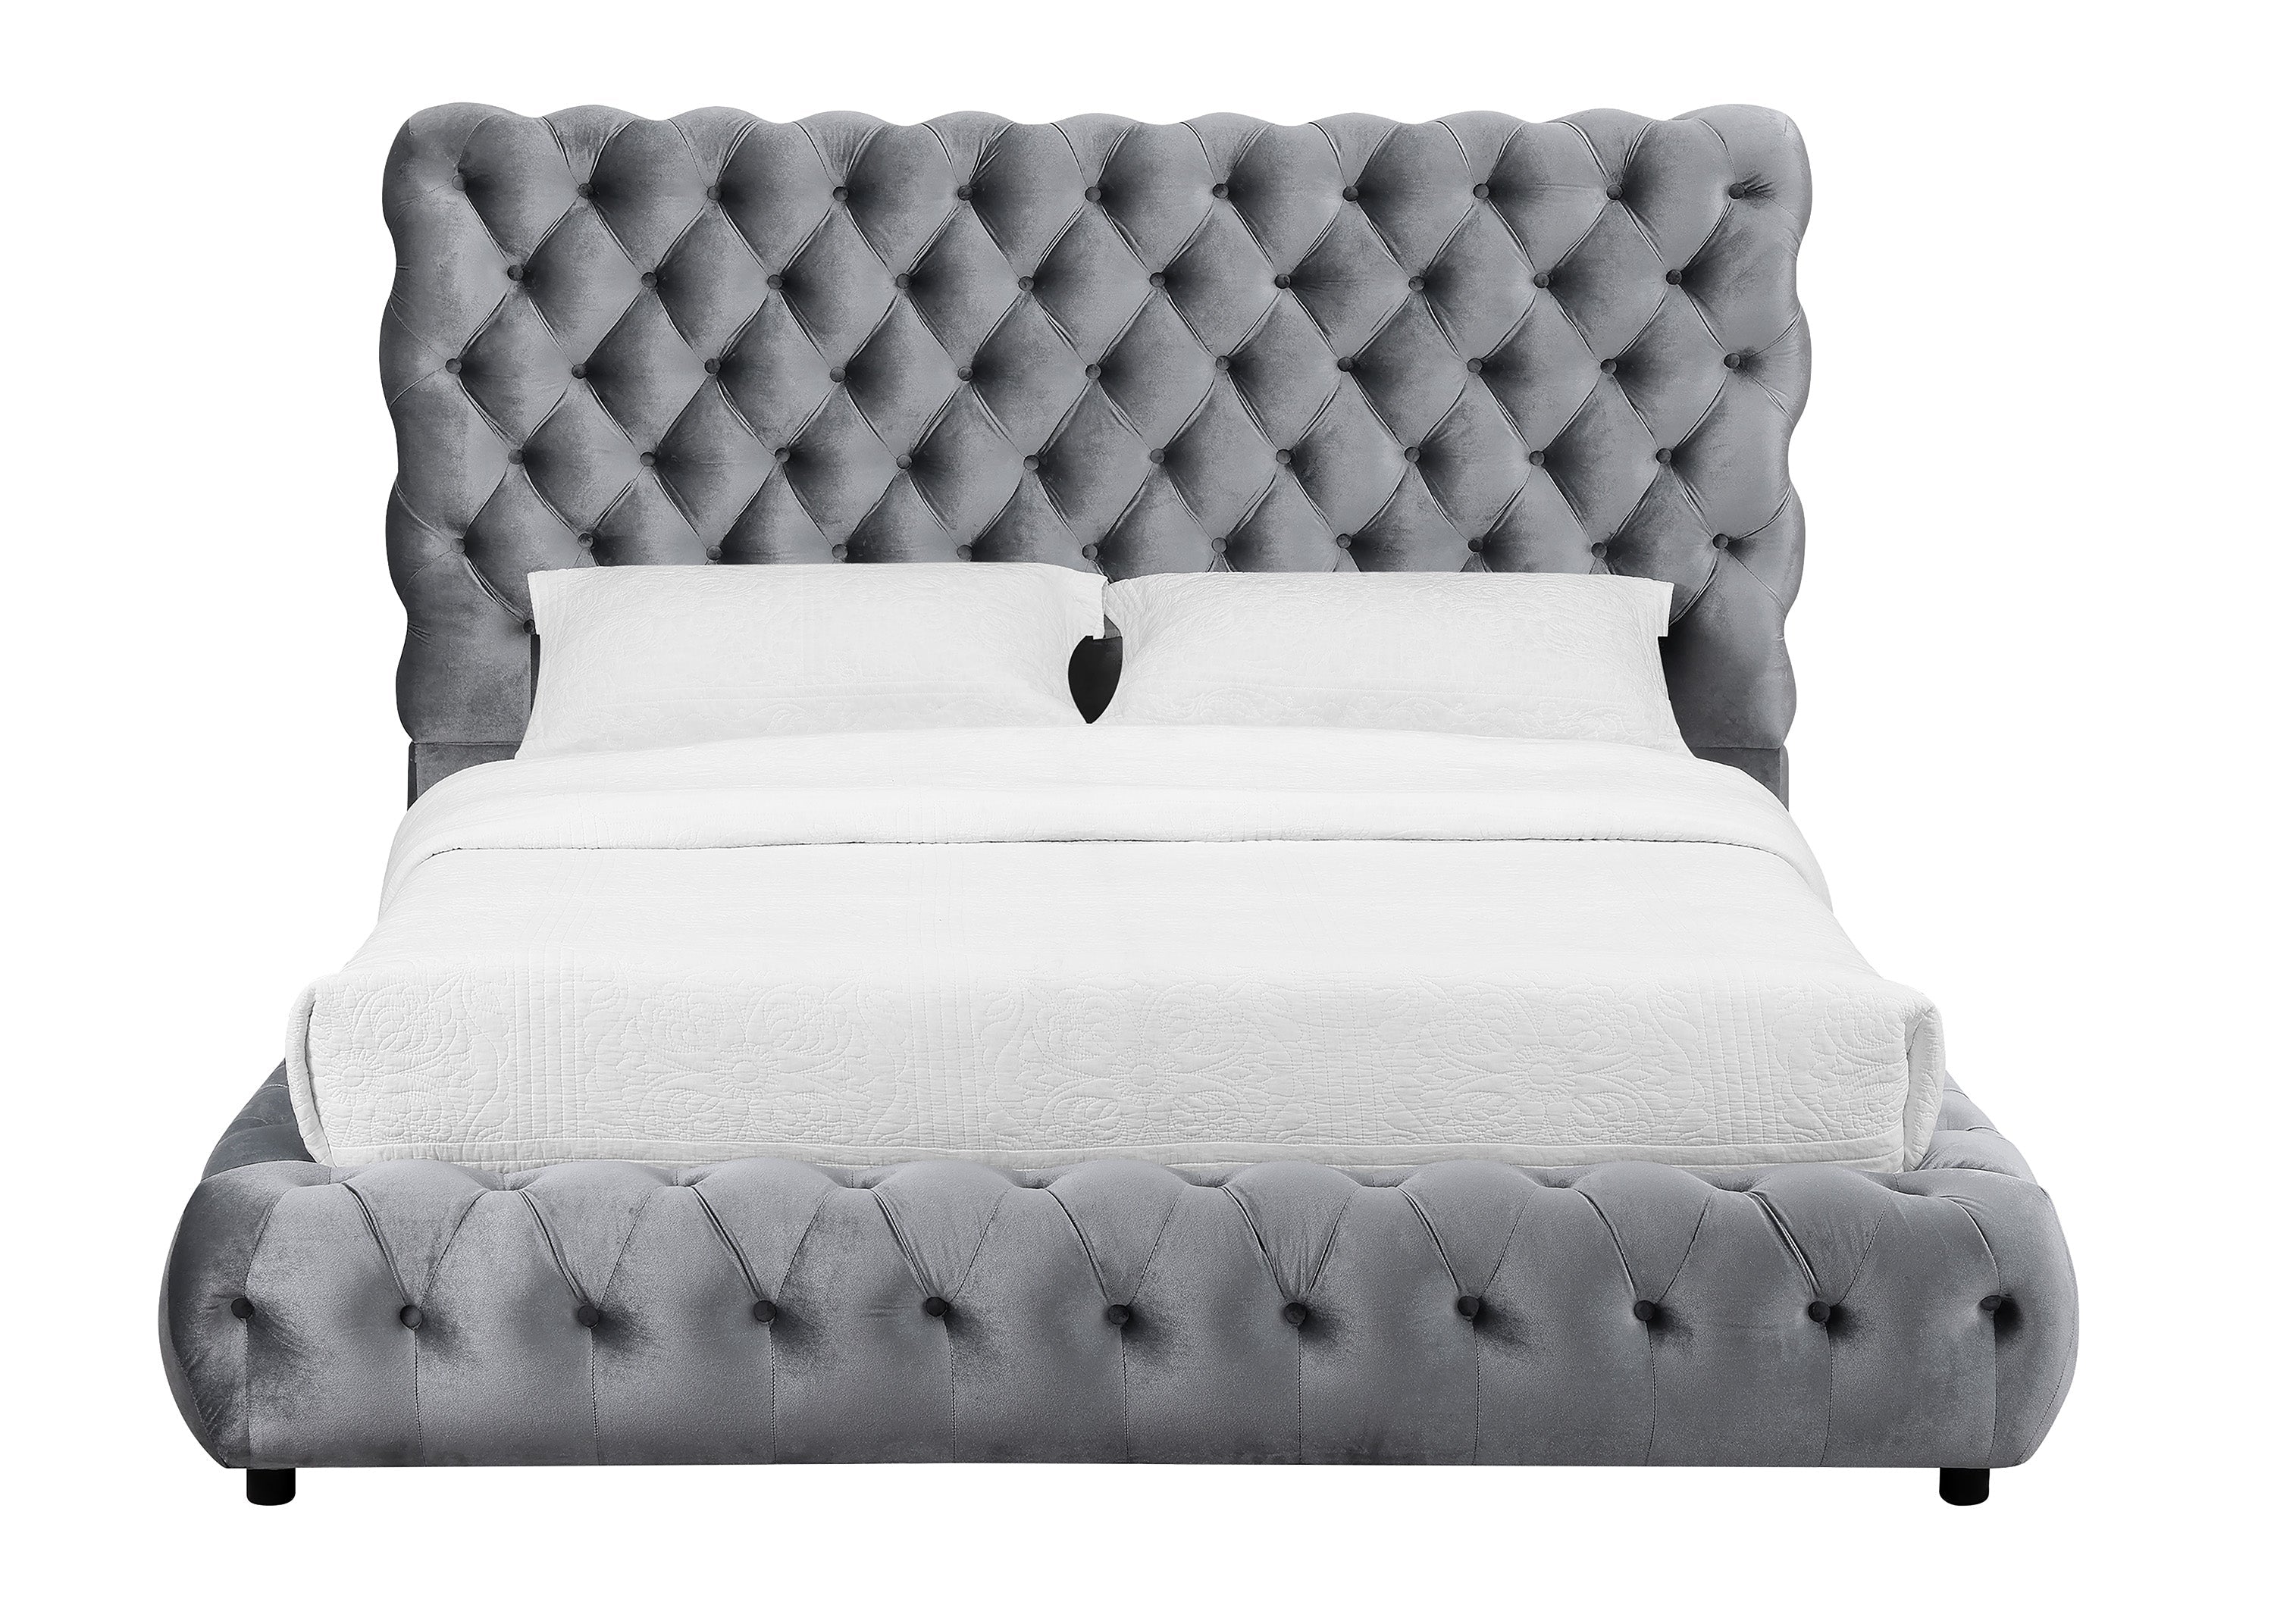 Flory Gray Queen Upholstered Platform Bed - SET | 5112GY-Q-HBFB | 5112GY-KQ-RAIL - Bien Home Furniture &amp; Electronics